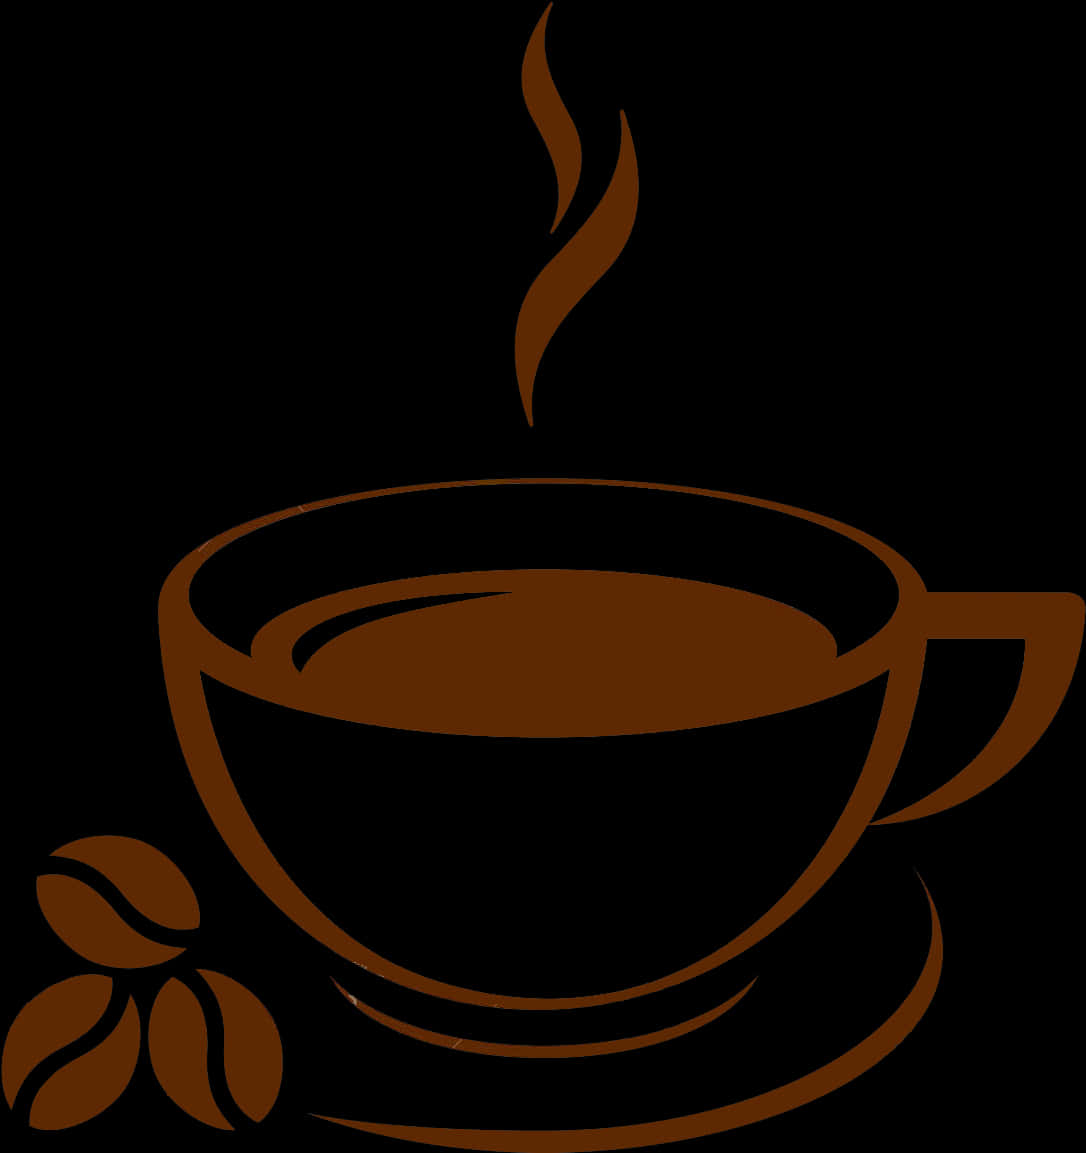 Steaming Coffee Cup Graphic